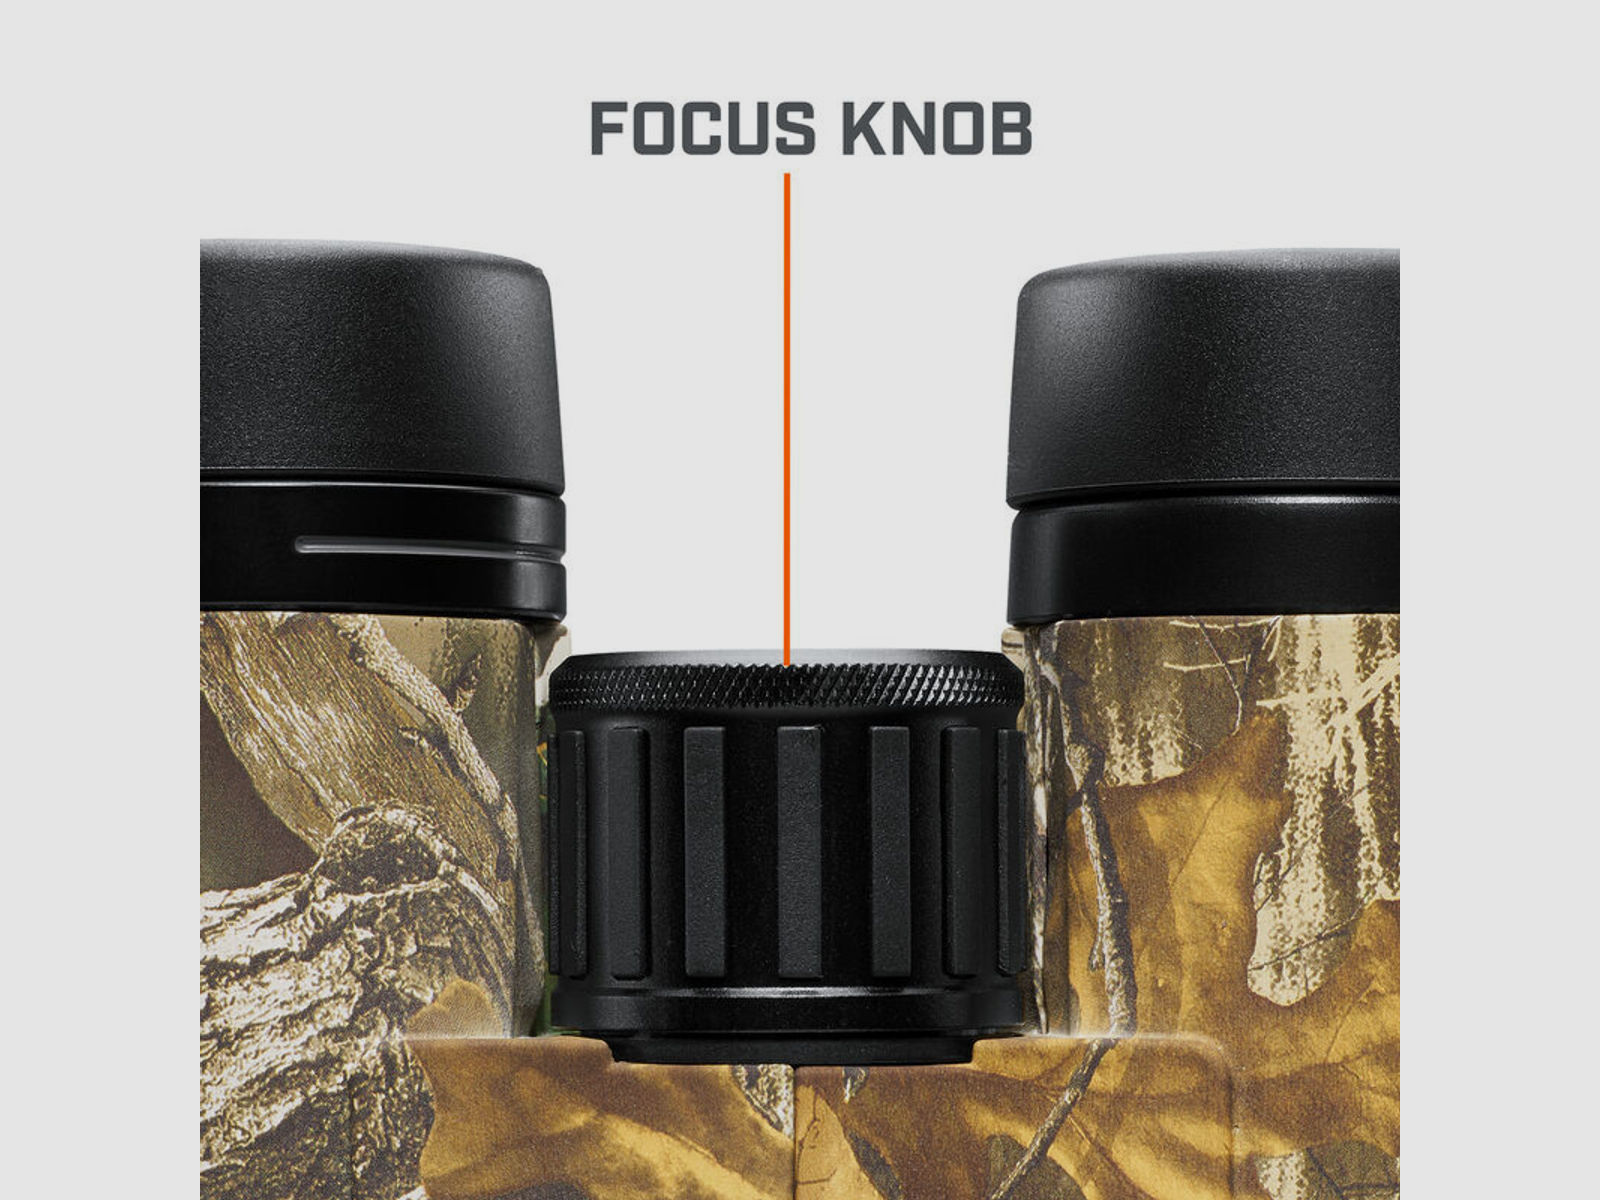 Bushnell Fernglas Engage 'X' 10x42mm, Real Tree, EDX, FMC, bleifrei